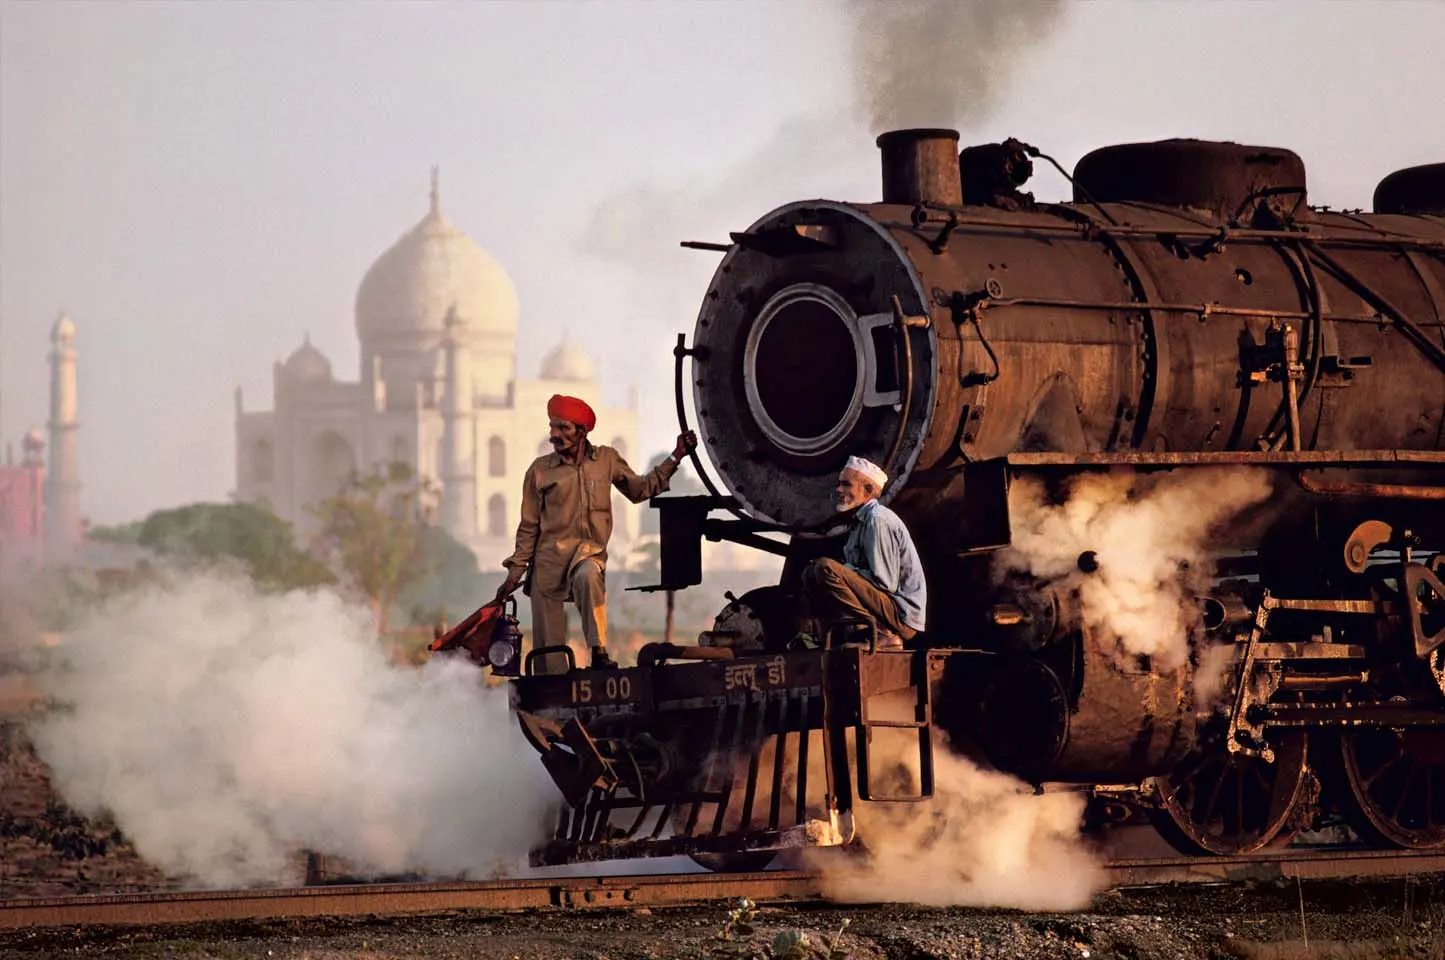 ADMIRE THE IMPRESSIVE COLLECTION - Steve McCurry ICONS in Chicago: A Photography Exhibit